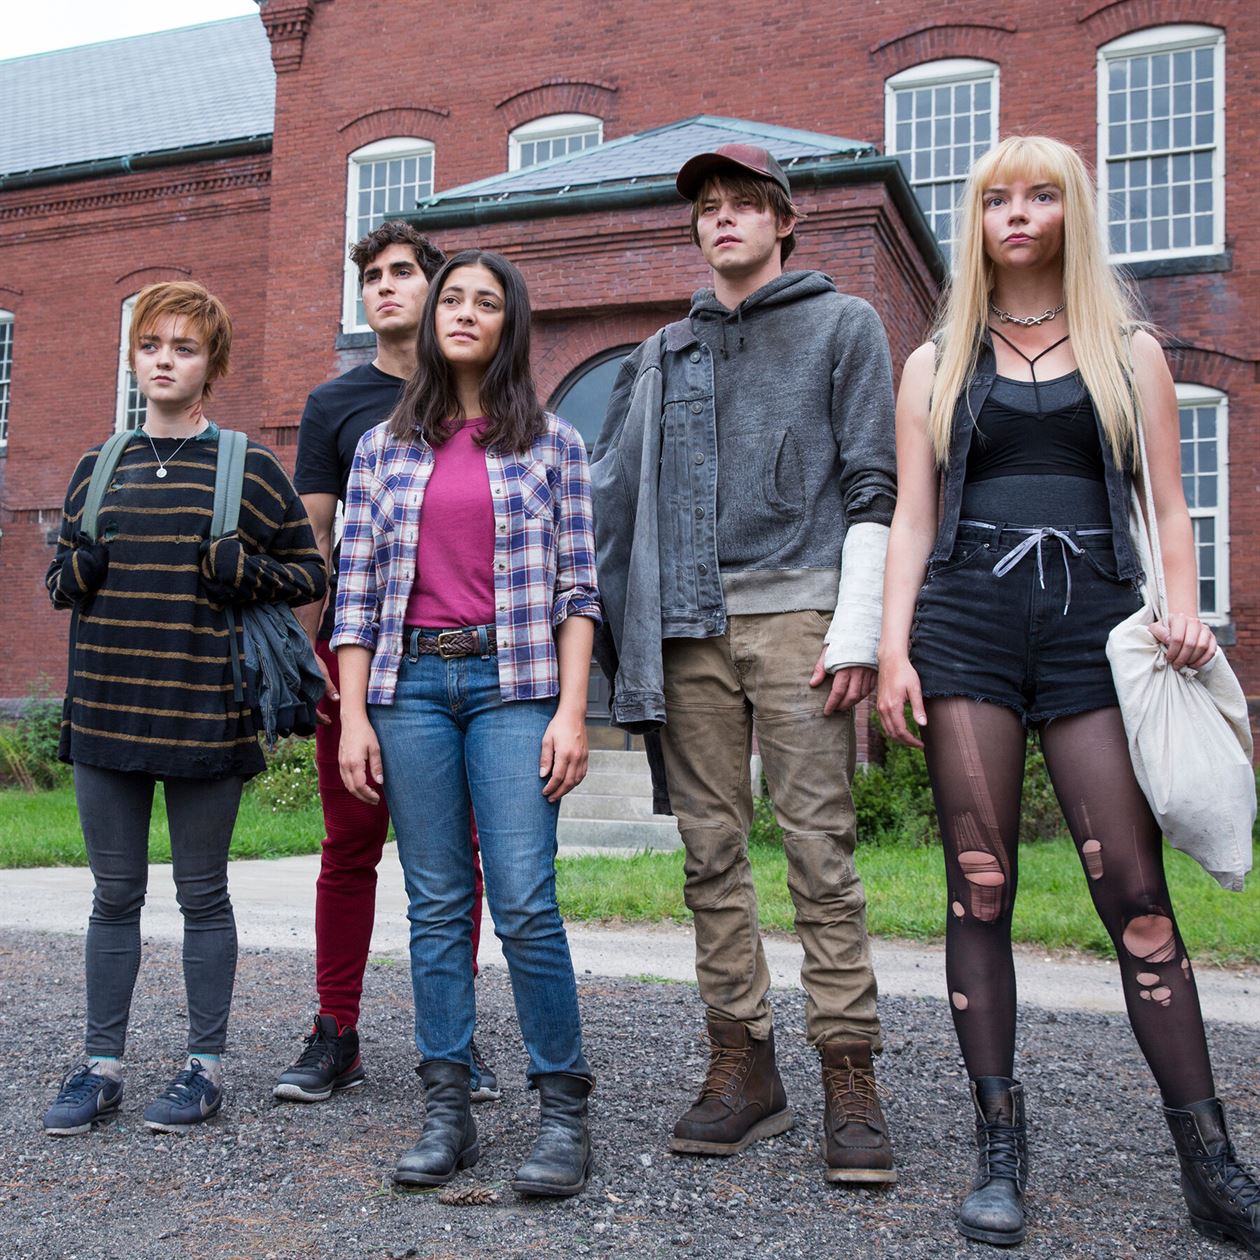 "The New Mutants" is the final installment of the "X-Men" series. Photo courtesy of 20th Century Studios